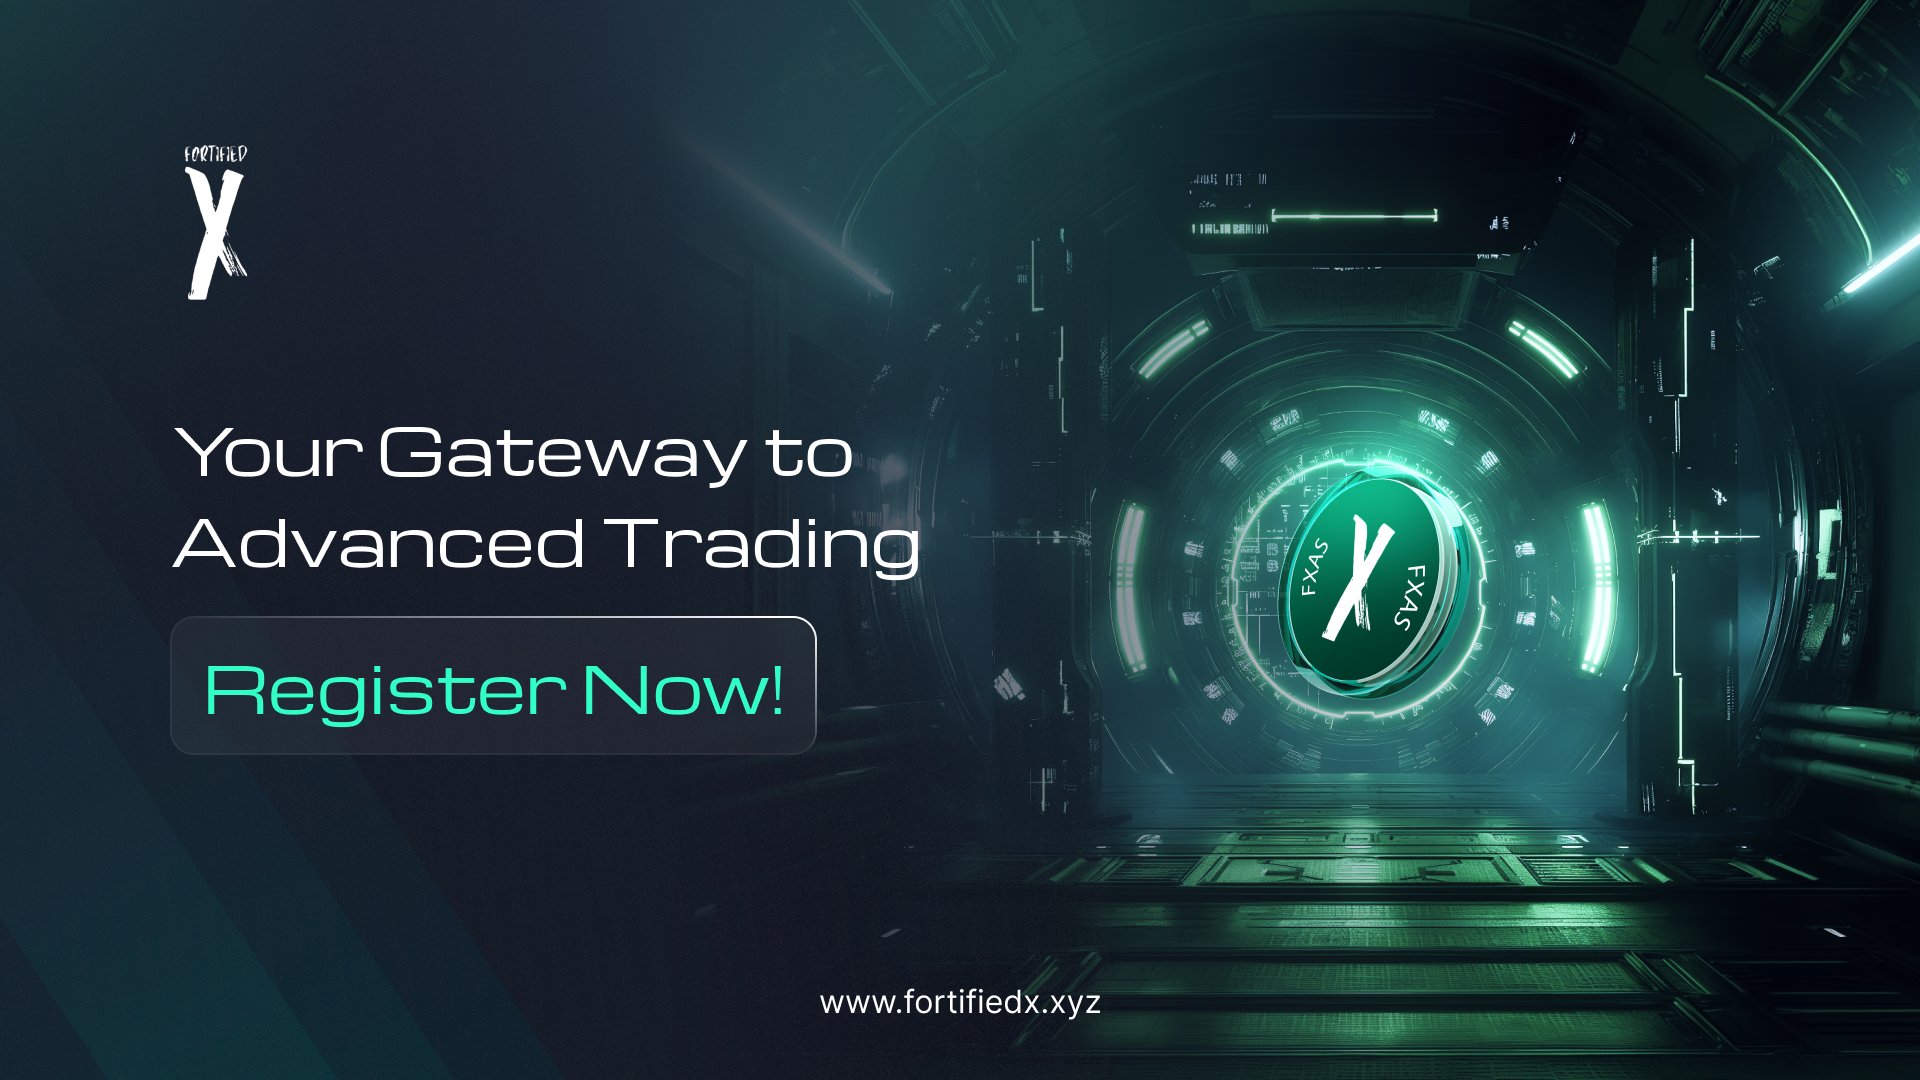 Fortified X ICO is your chance to be an early adopter